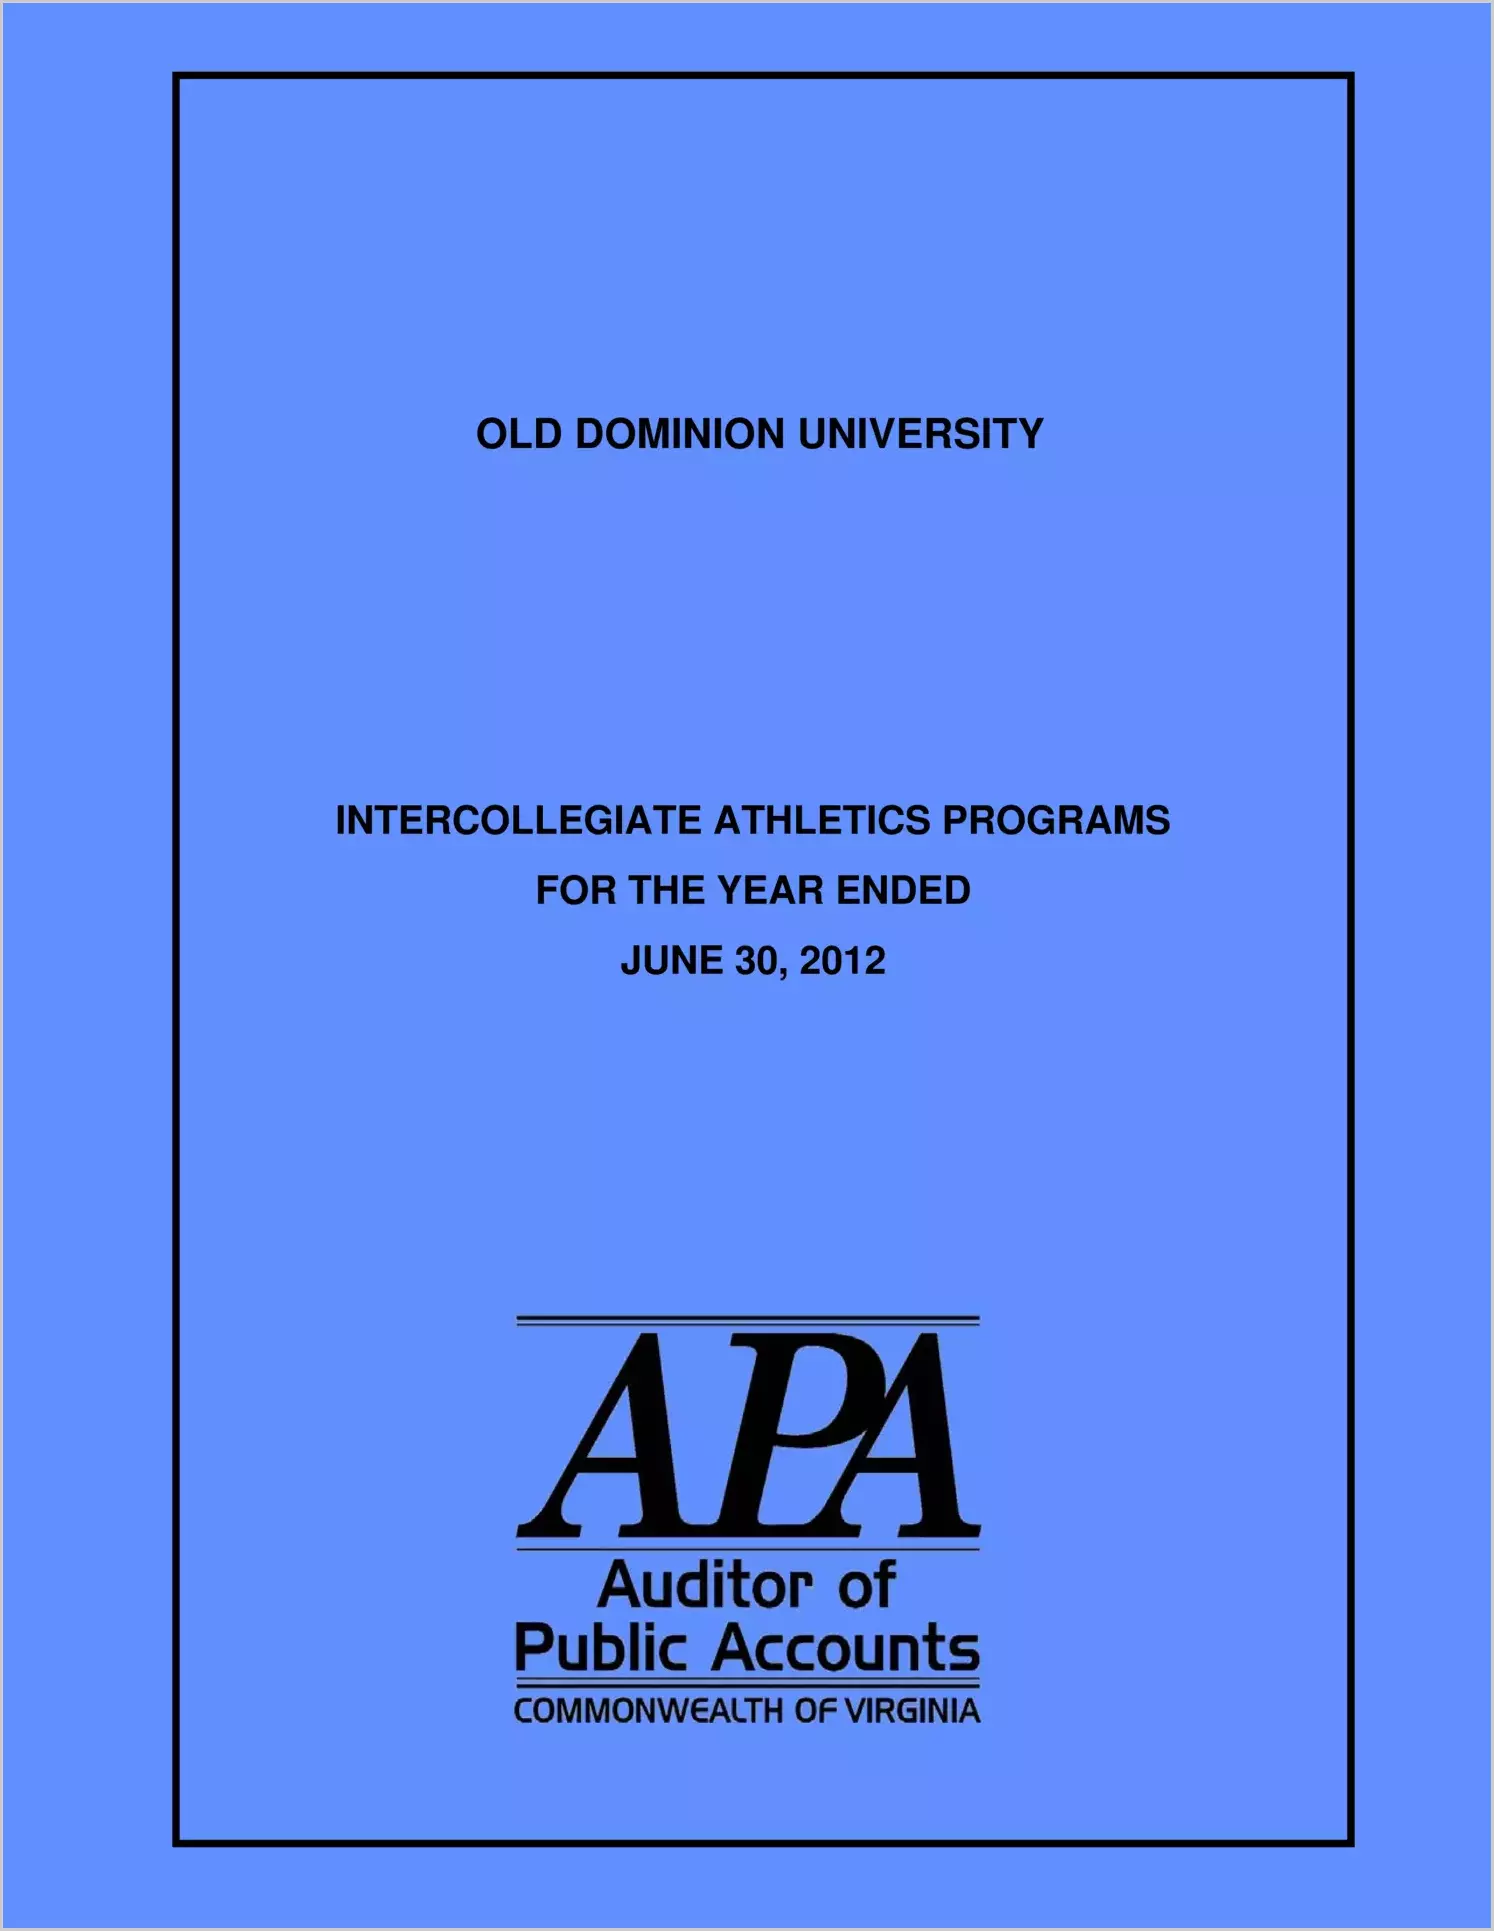 Old Dominion University Intercollegiate Athletic Programs for the year ended June 30, 2012